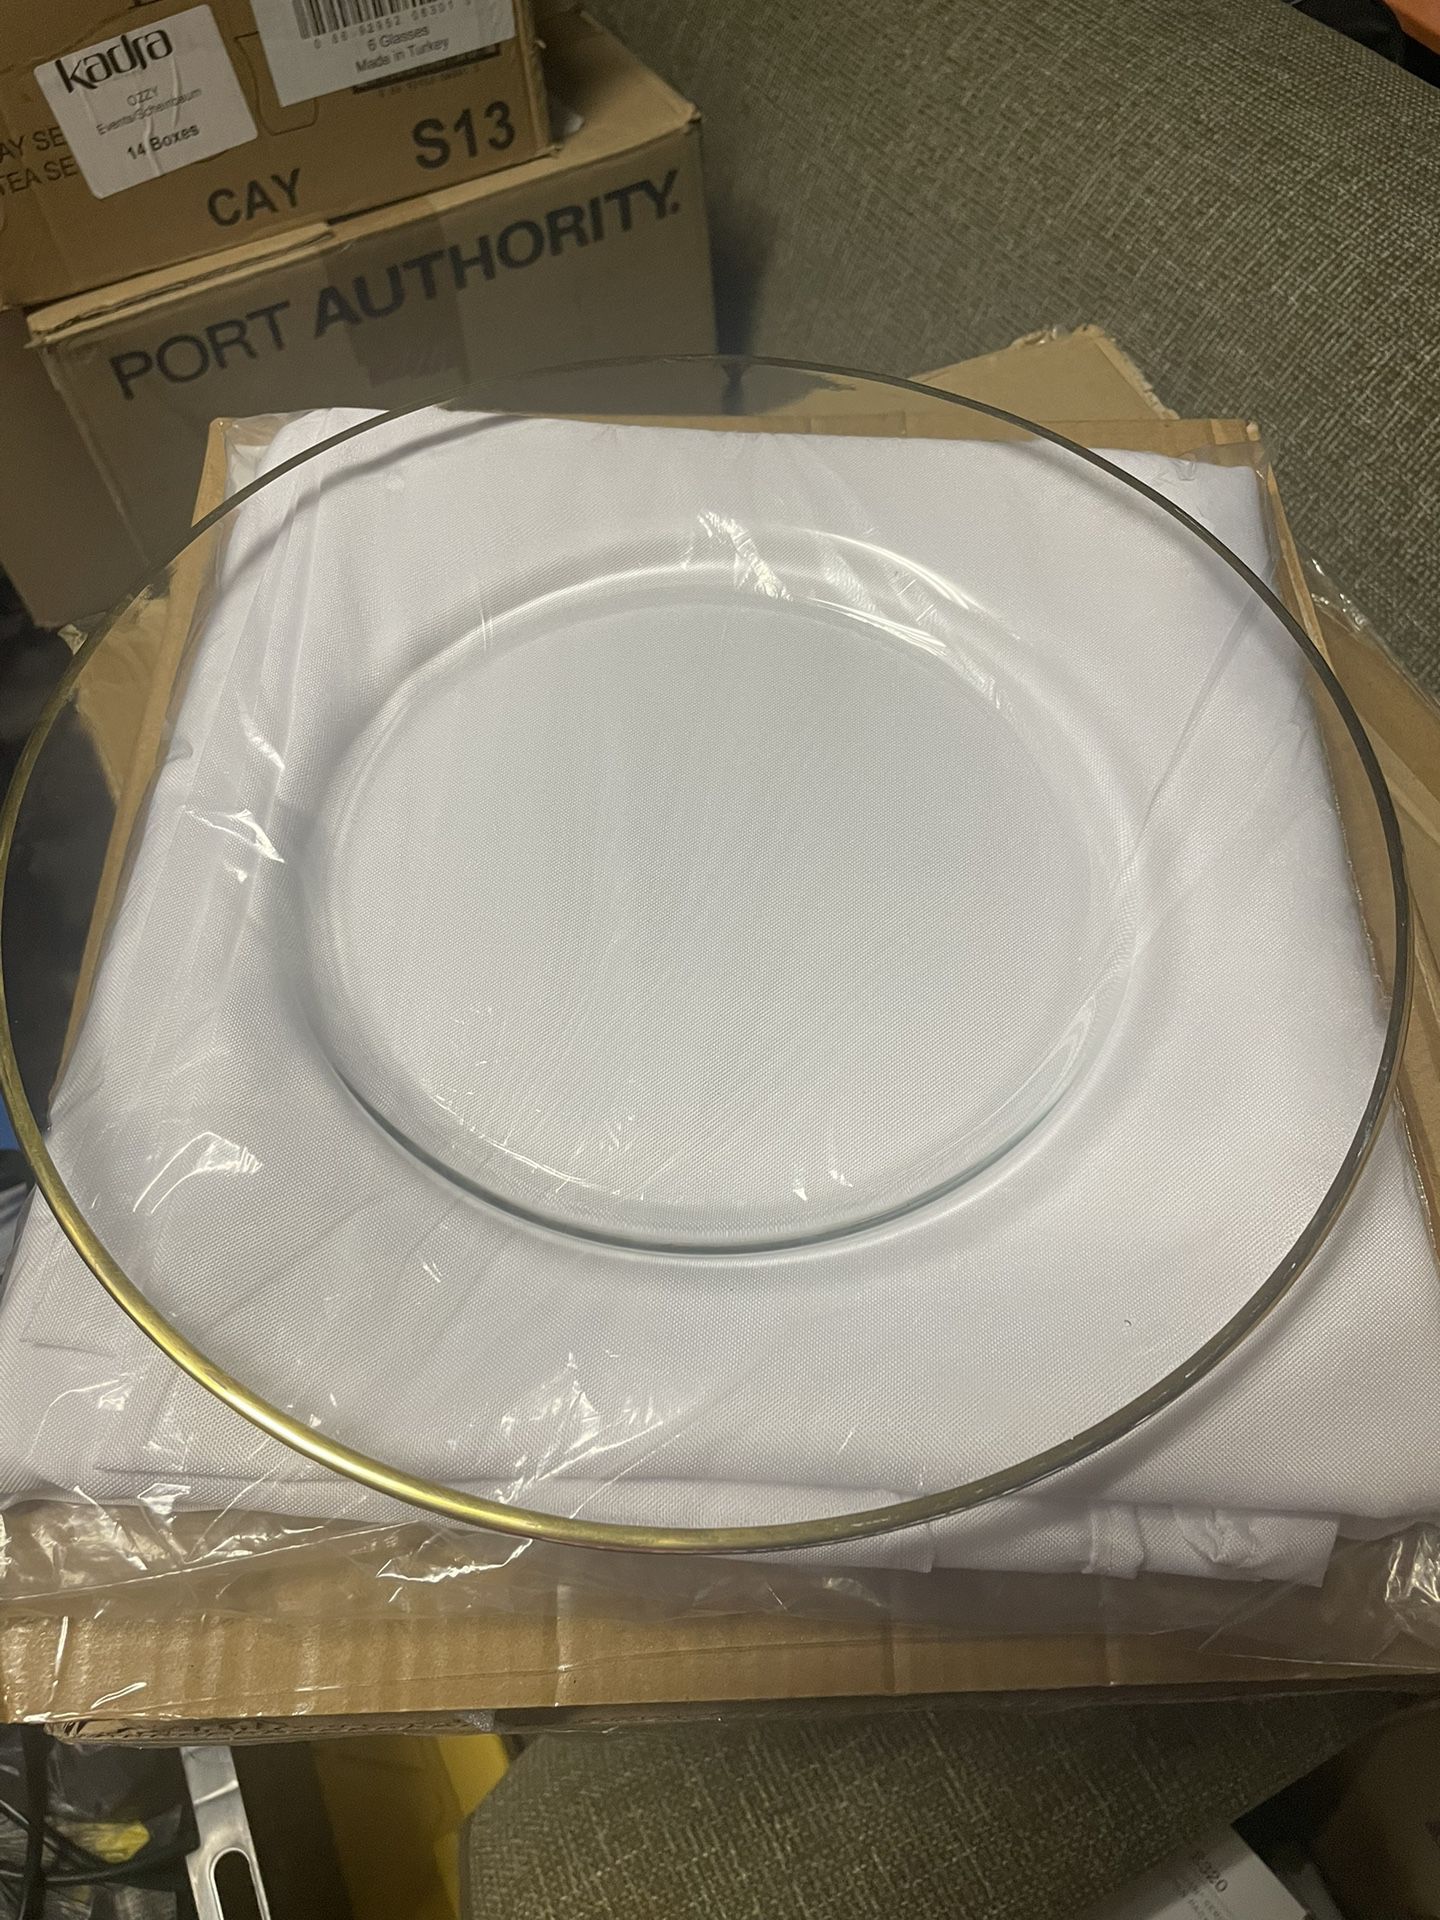  Clear Glass Charger 13 Inch Dinner Plate With Metallic Rim - Set of 4 - Gold 